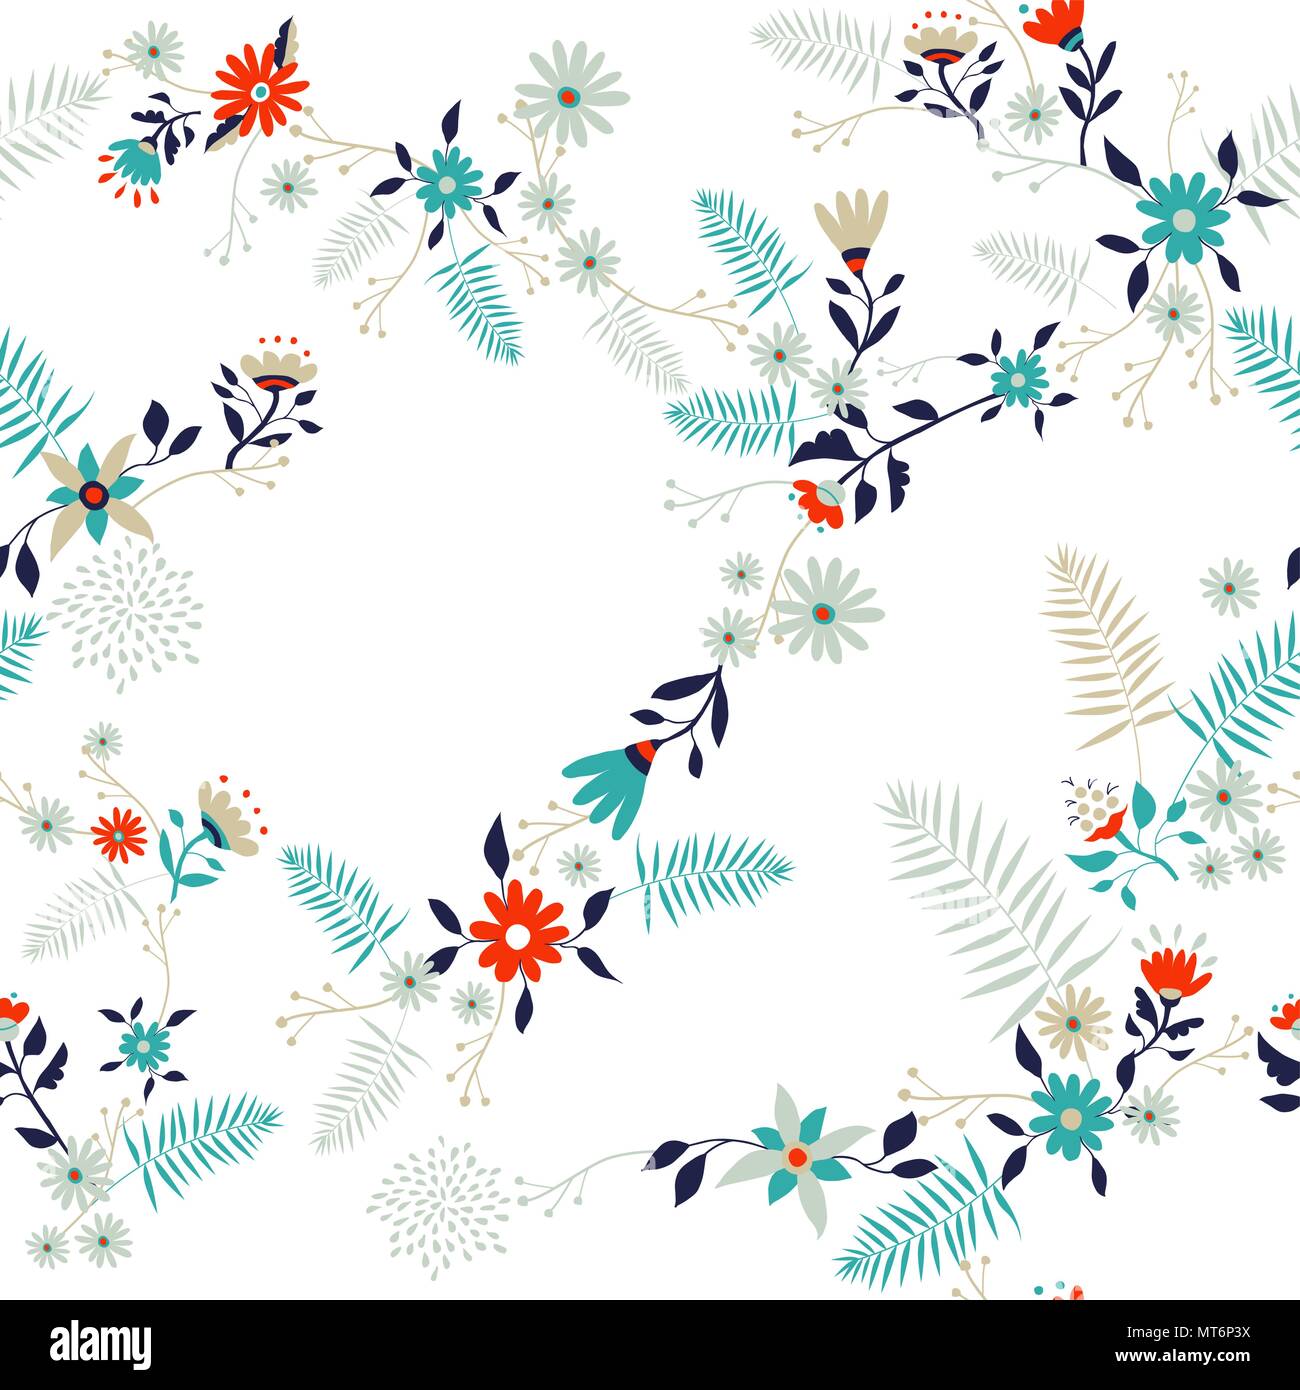 Floral seamless pattern illustration in retro art style. Wild flower and leaves vintage decoration background. EPS10 vector. Stock Vector